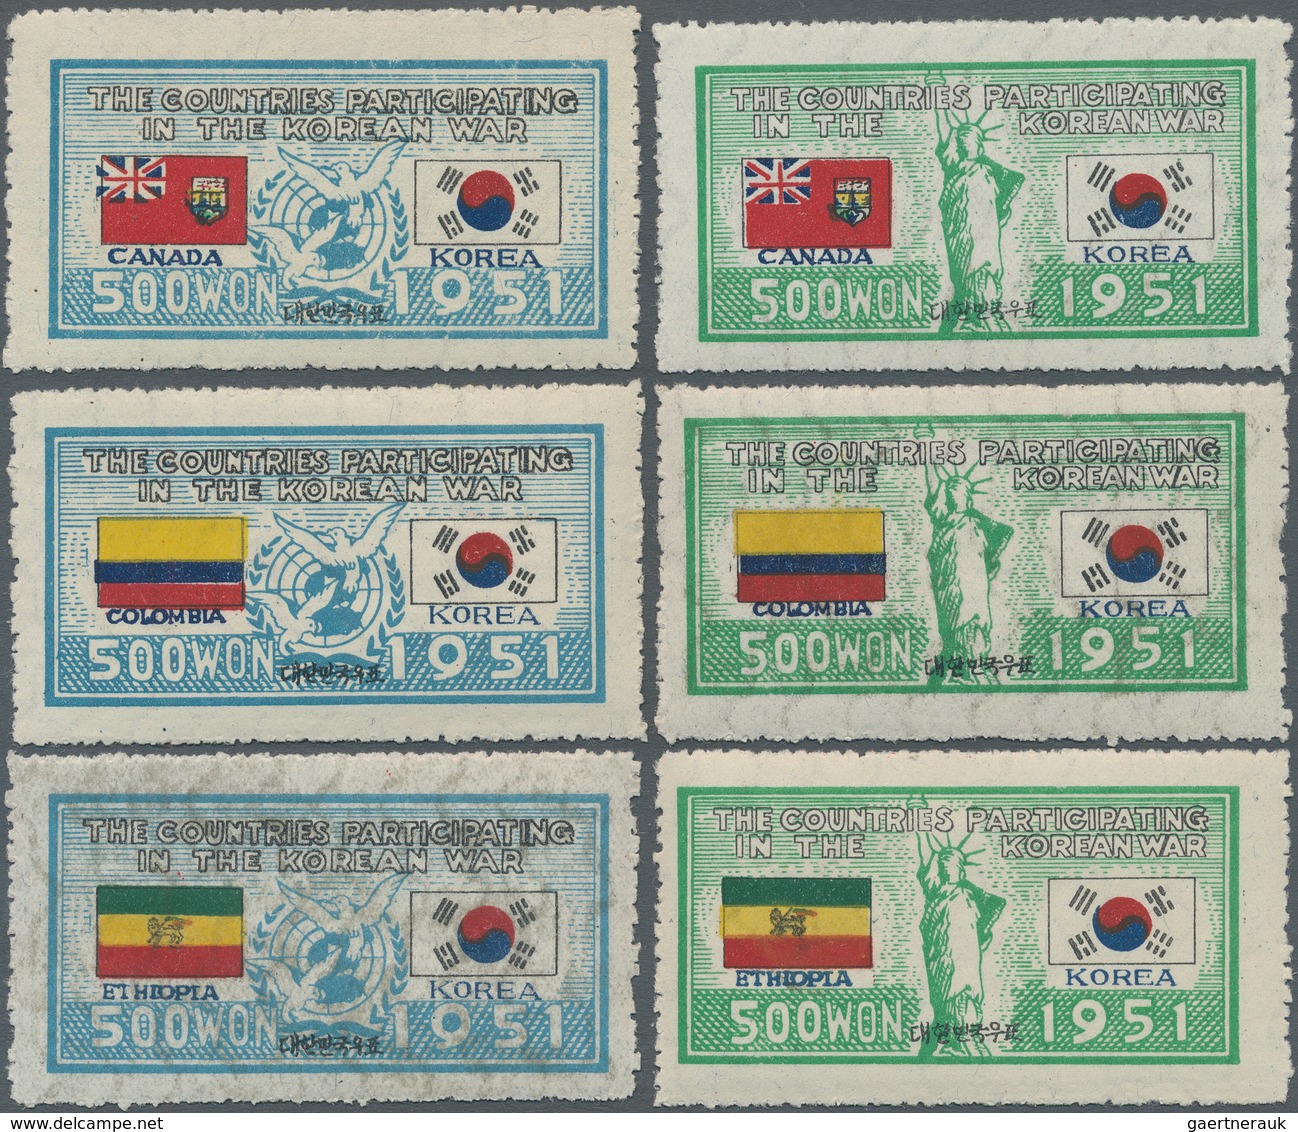 Korea-Süd: 1951, flag set of 44 vals. inc. Italy both old and new flag, mint never hinged MNH, 4 set